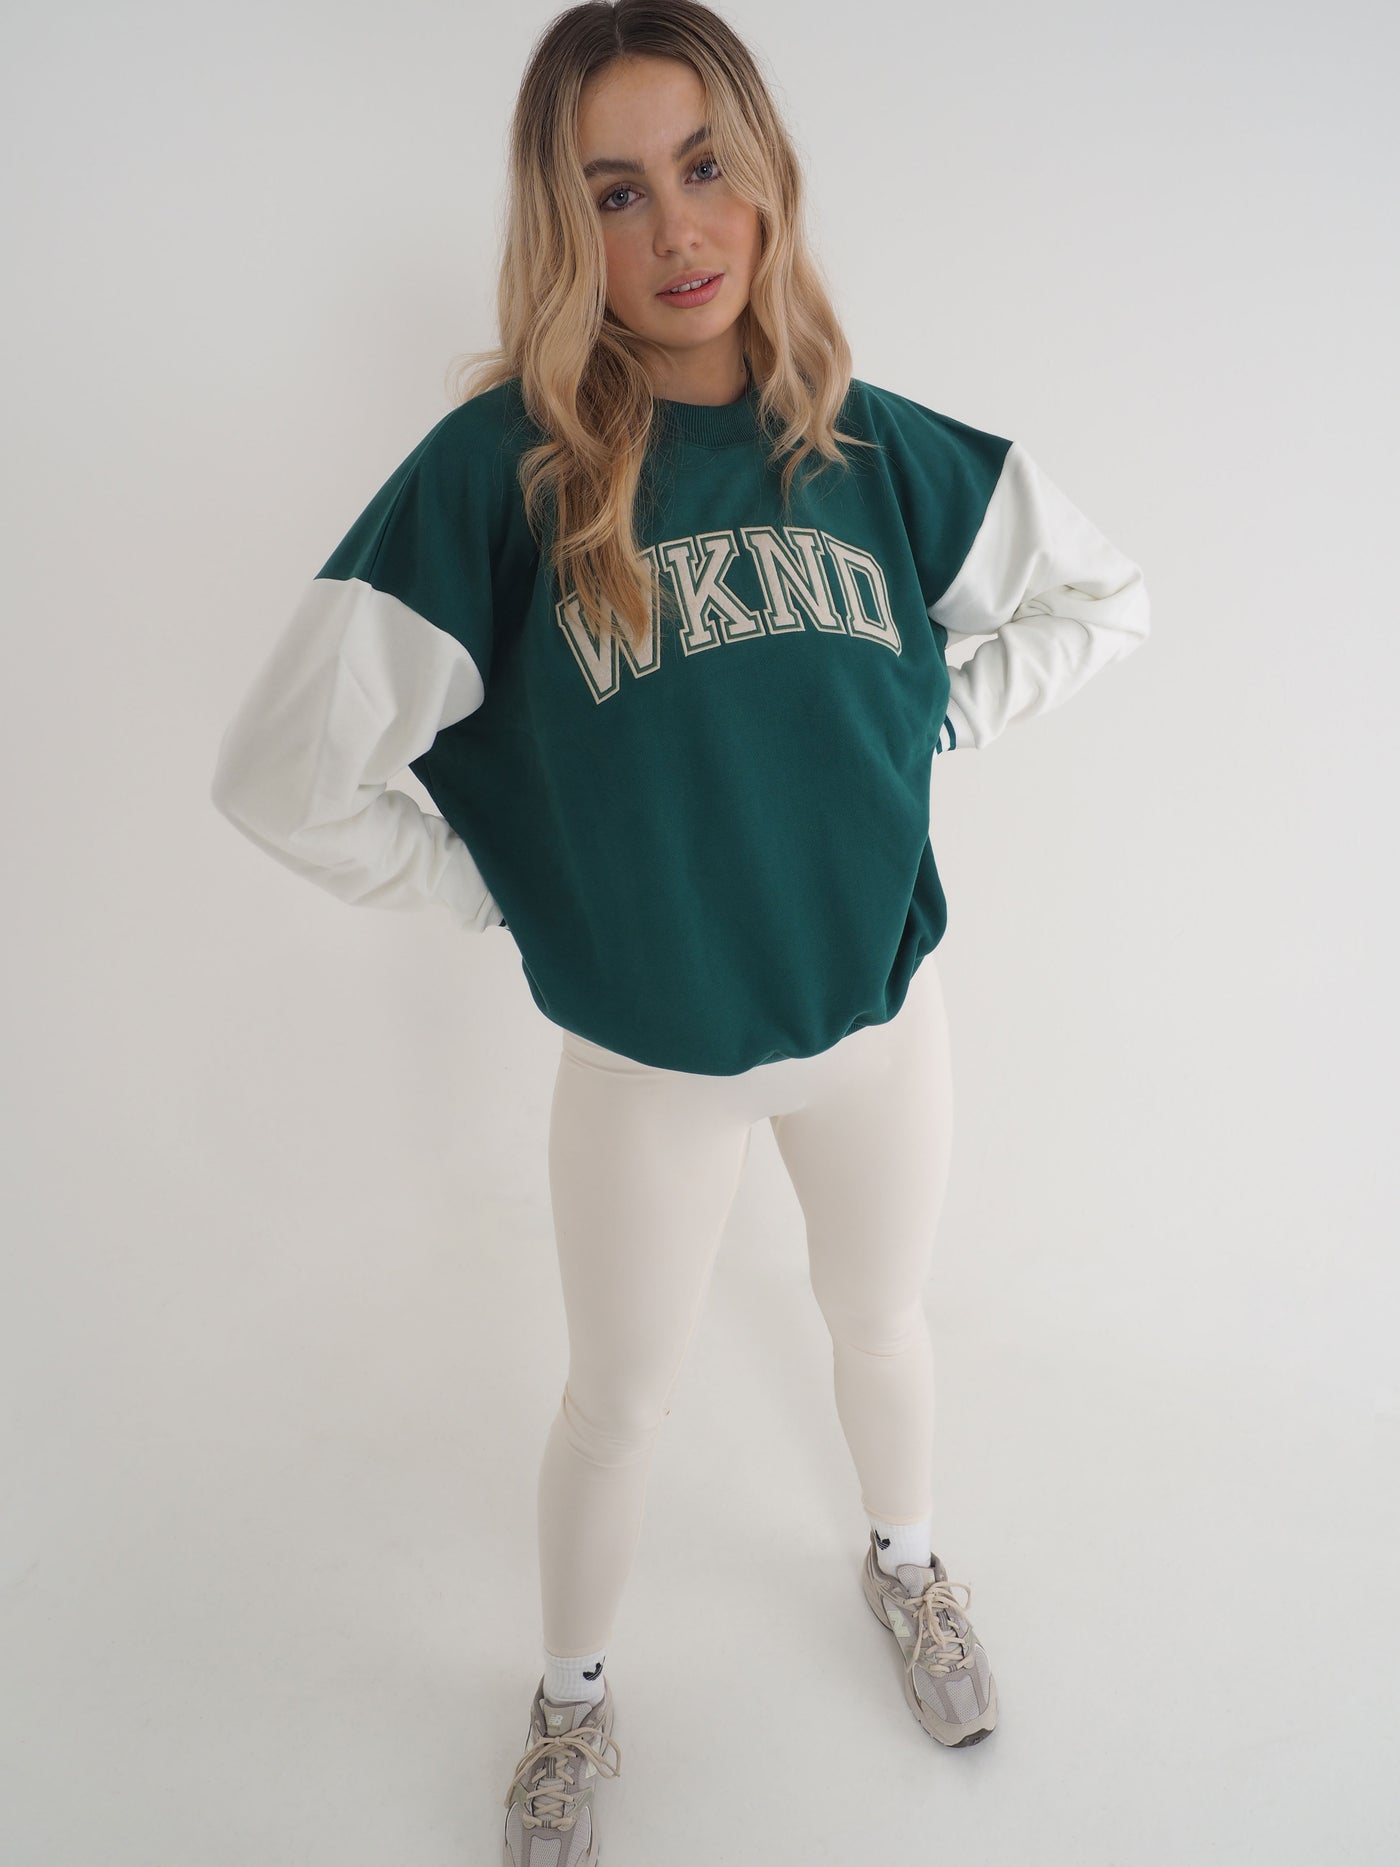 Blonde model is wearing a college varsity sweatshirt with eggnog leggings.  The WKND logo sewn to the chest.